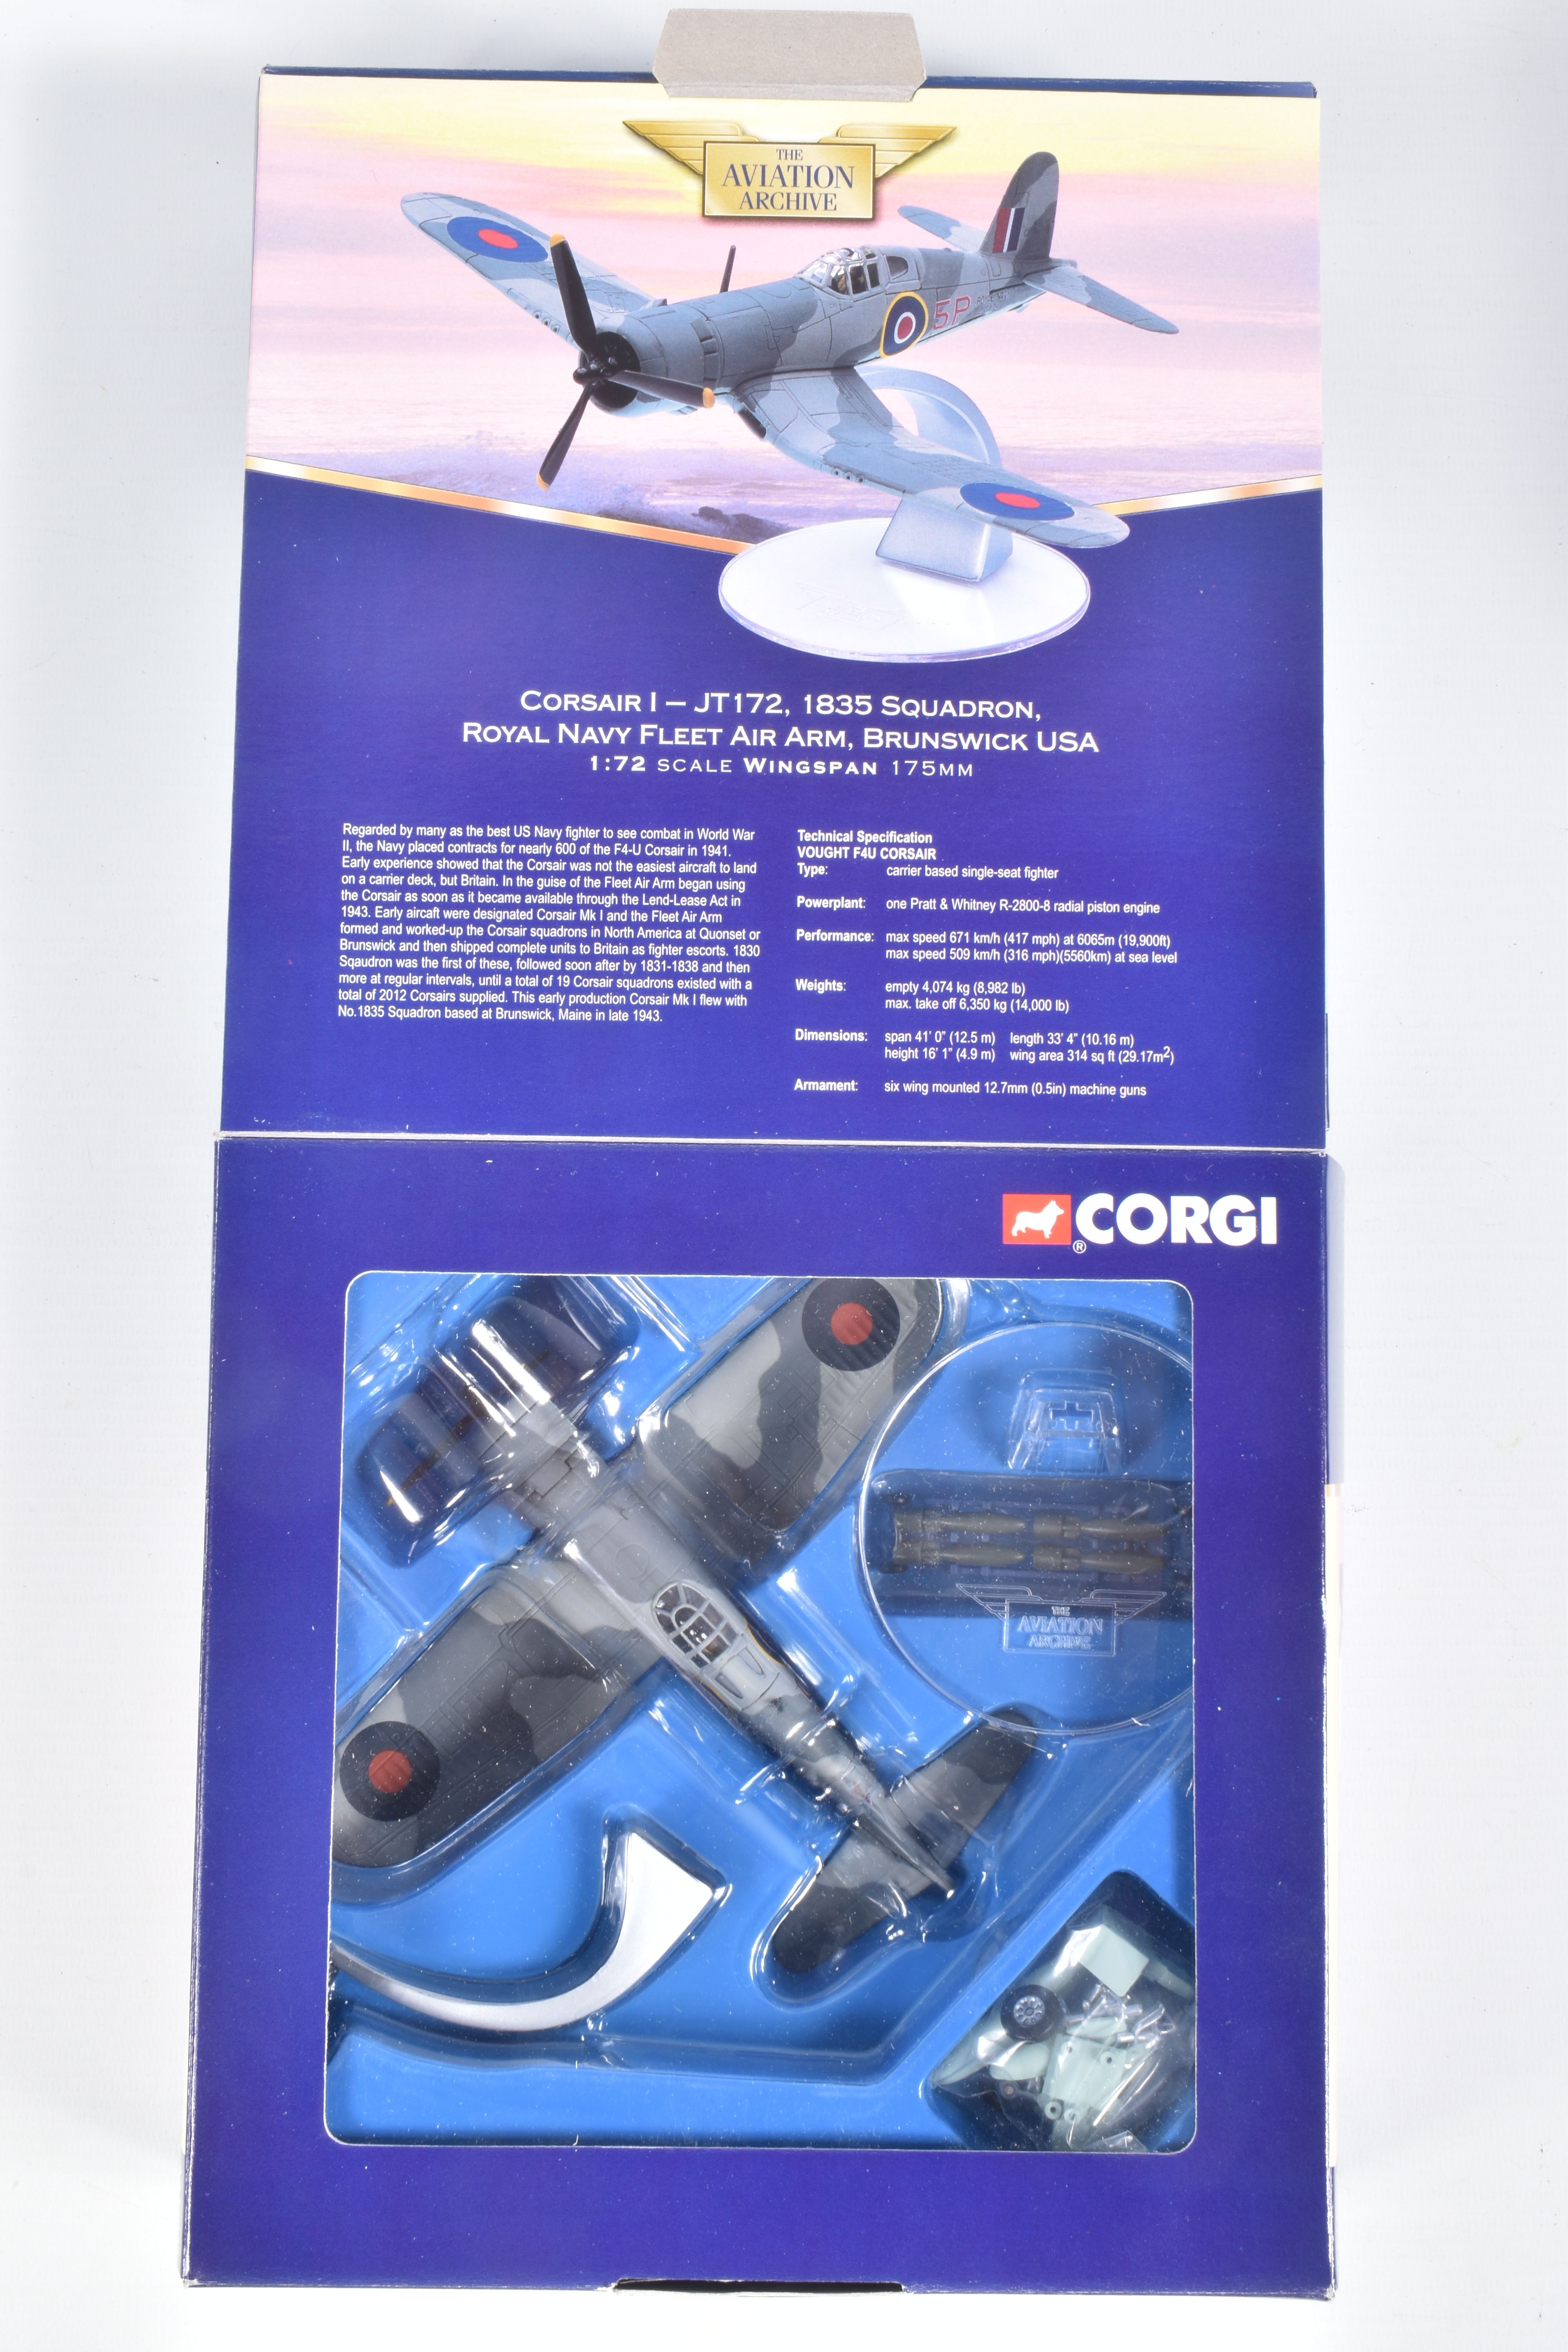 FIVE BOXED 1:72 SCALE LIMITED EDITION CORGI AVIATION ARCHIVE DIECAST MODEL AIRCRAFTS, the first a DH - Image 11 of 11